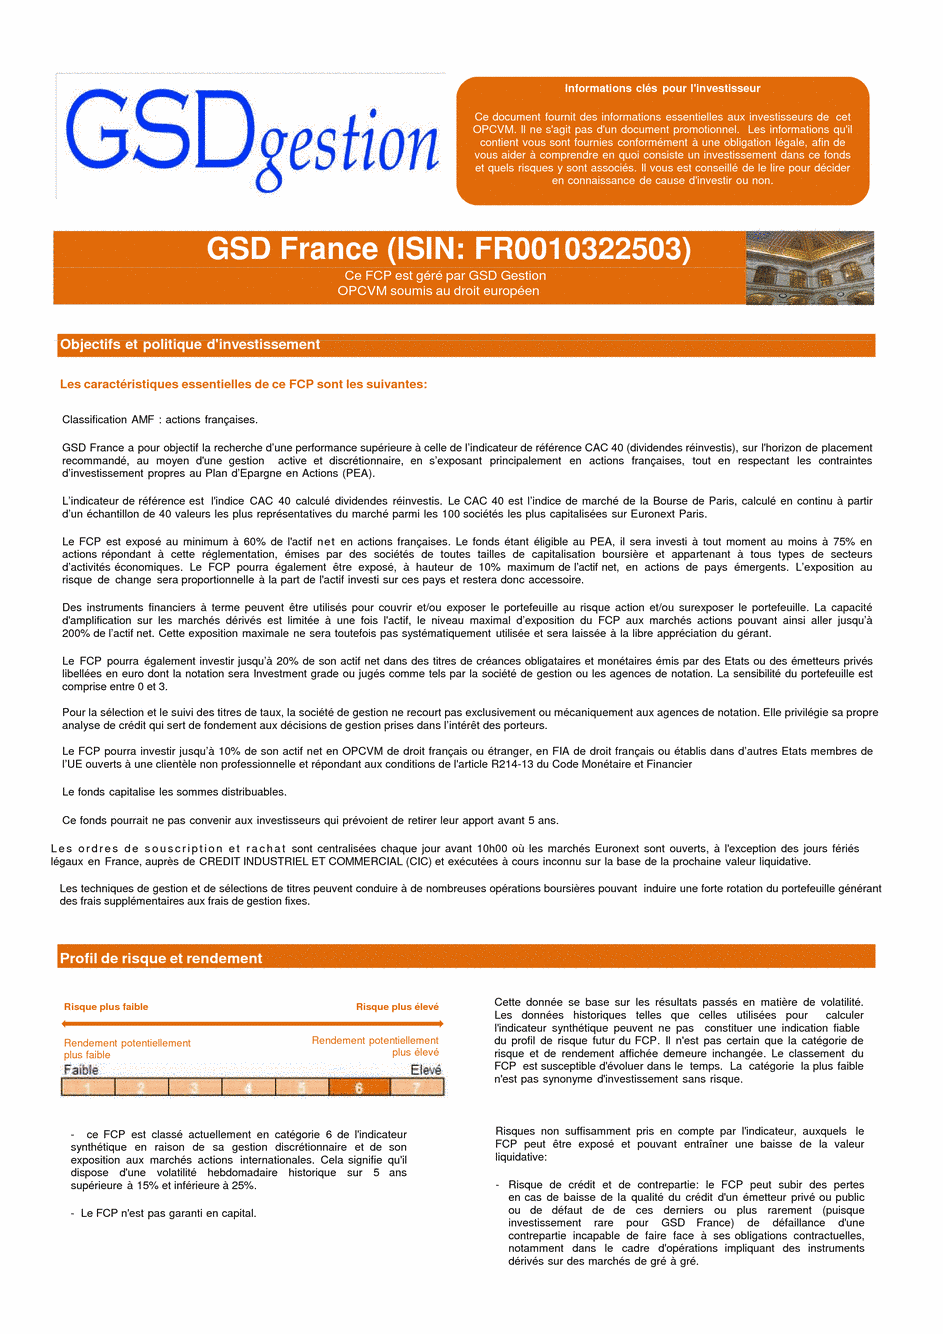 DICI-Prospectus Complet GSD France - 29/01/2018 - French